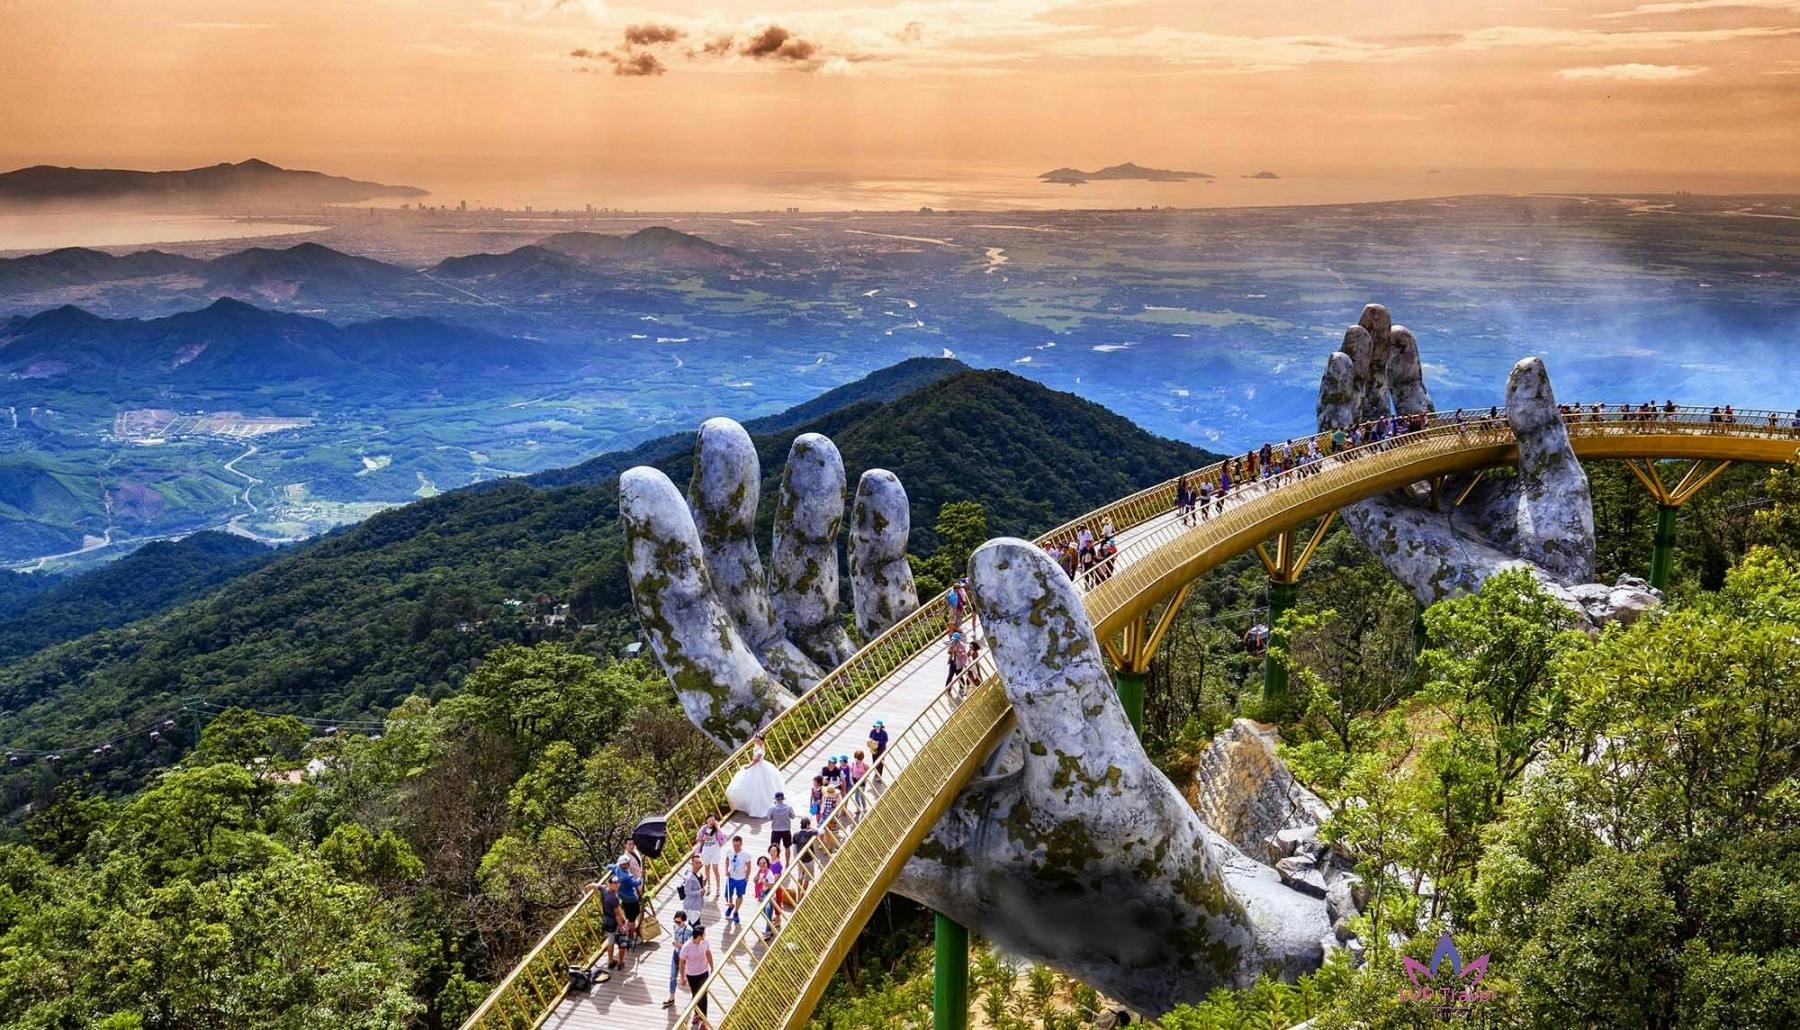 Ba Na hills full day guided tour from Hoi An and Da Nang